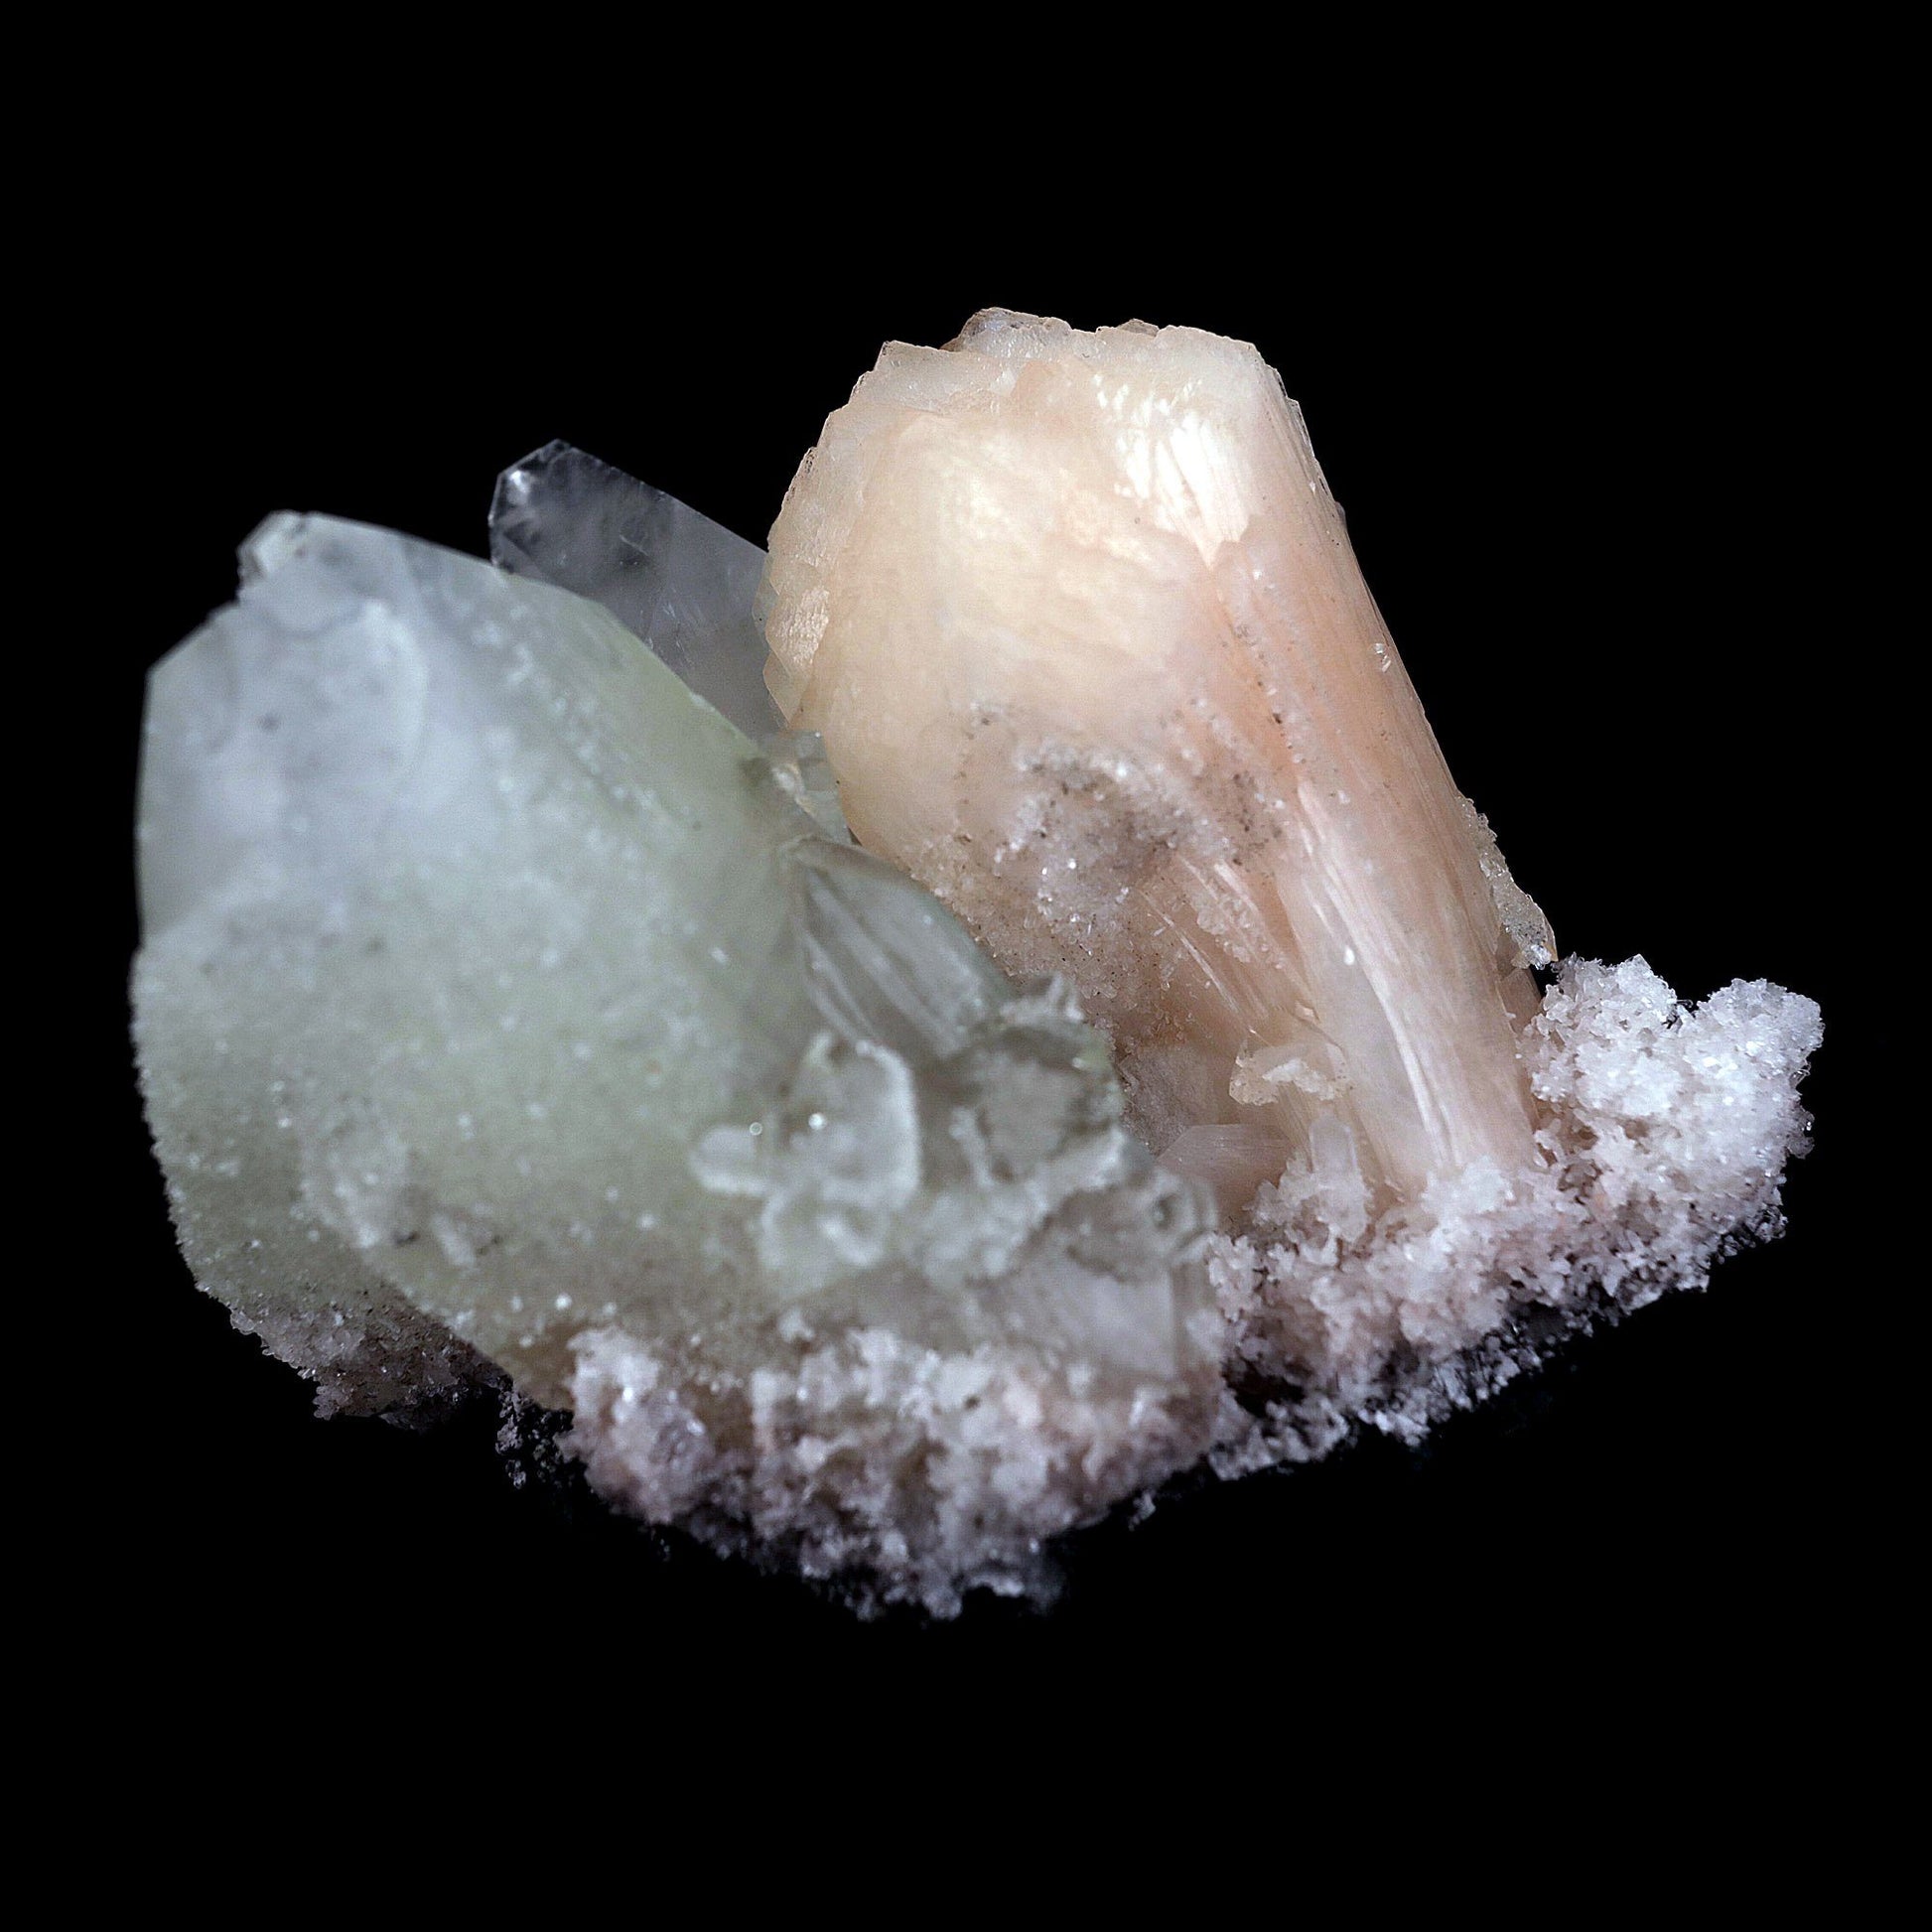 Fluro Apophyllite With Stilbite on Chalcedony Natural Mineral Specimen…  https://www.superbminerals.us/products/fluro-apophyllite-with-stilbite-on-chalcedony-natural-mineral-specimen-b-4428  Features: Jalgaon's elegant cluster of classic two-toned apophyllite crystals. The sharply tetragonal, very glassy crystals have striking water-clear, gem, colourless steeply pyramidal terminations and subtle pastel-green bodies. The large doubly terminated crystal measures 7.8 cm in length